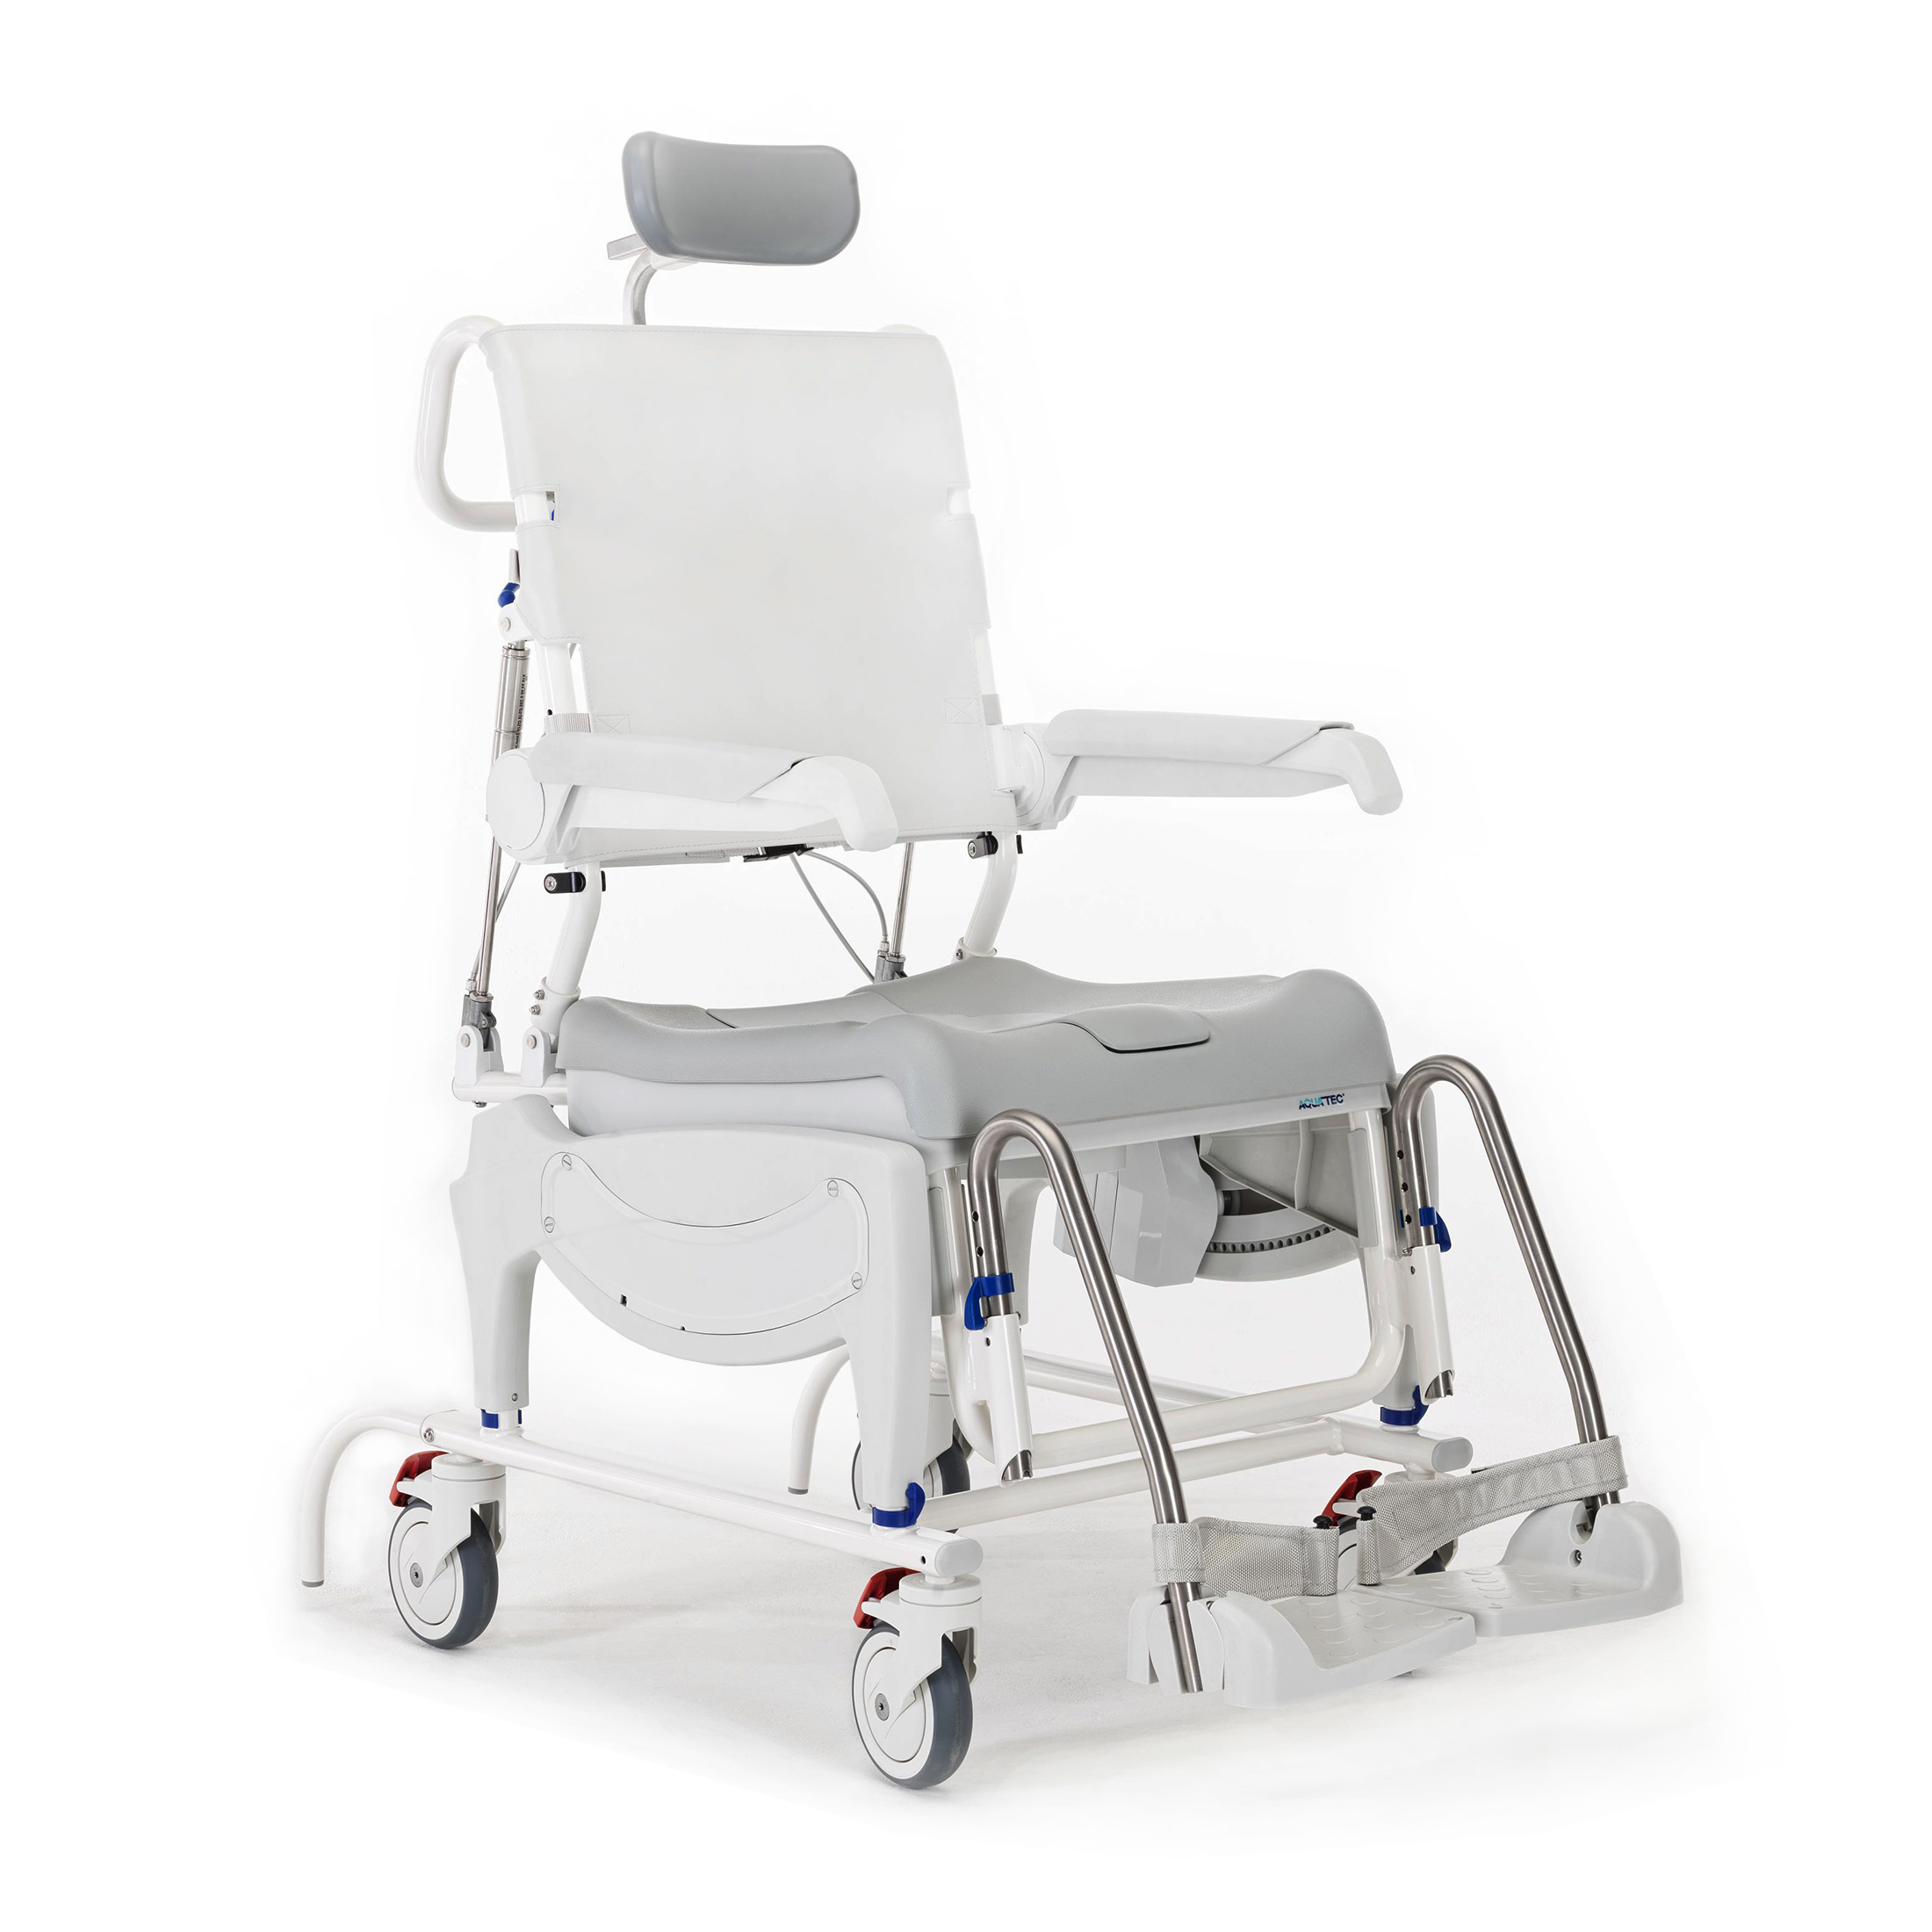 Chaise d'aisance mobile avec shampooing inclinable